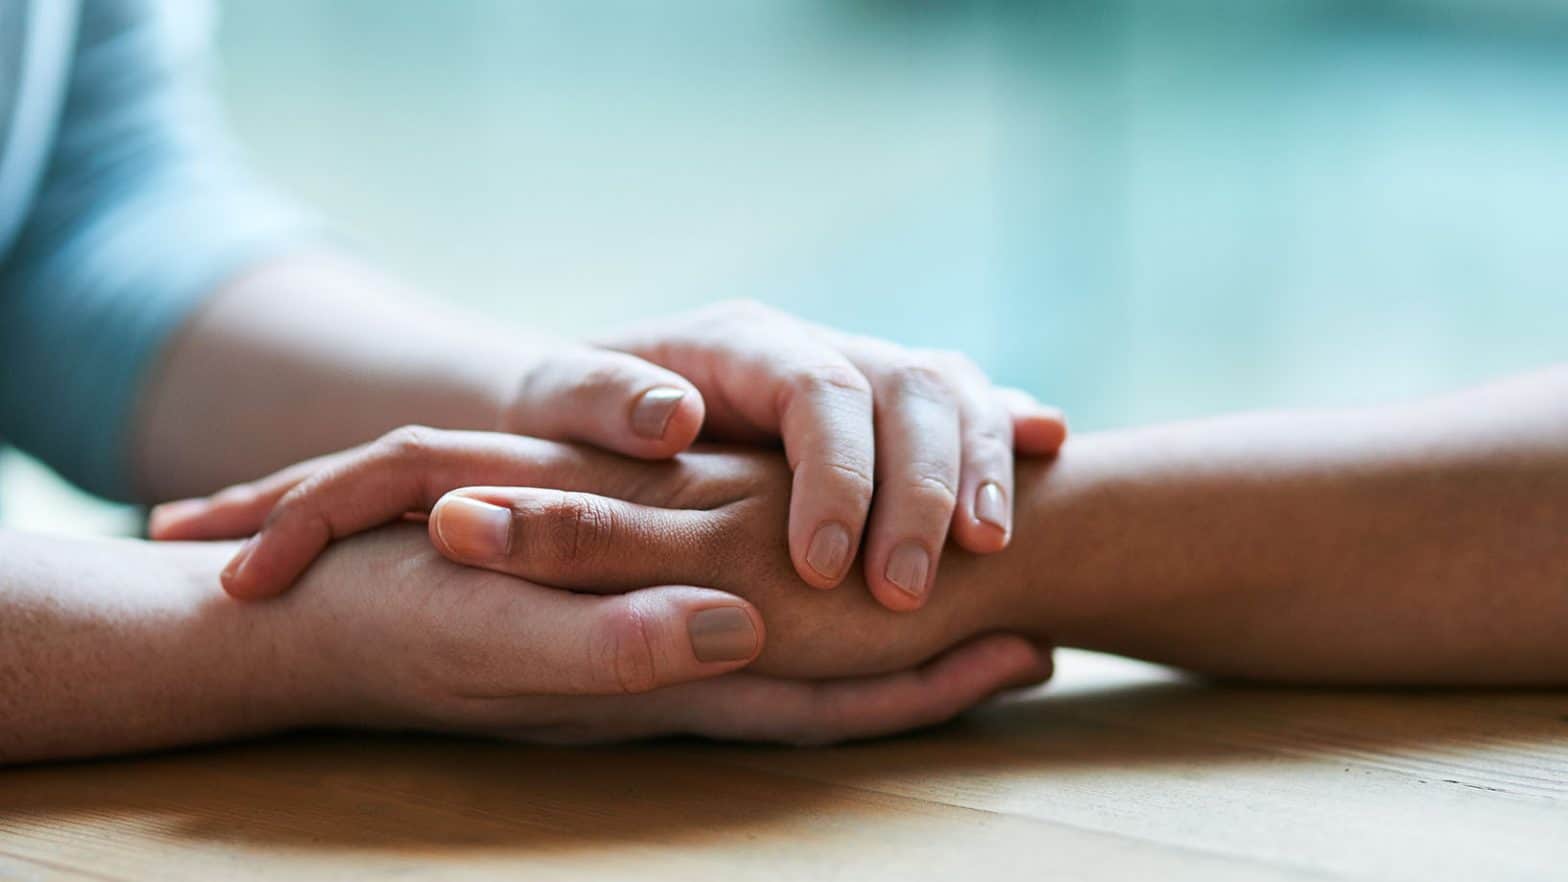 A pair of hands holding another's hand in a comforting gesture